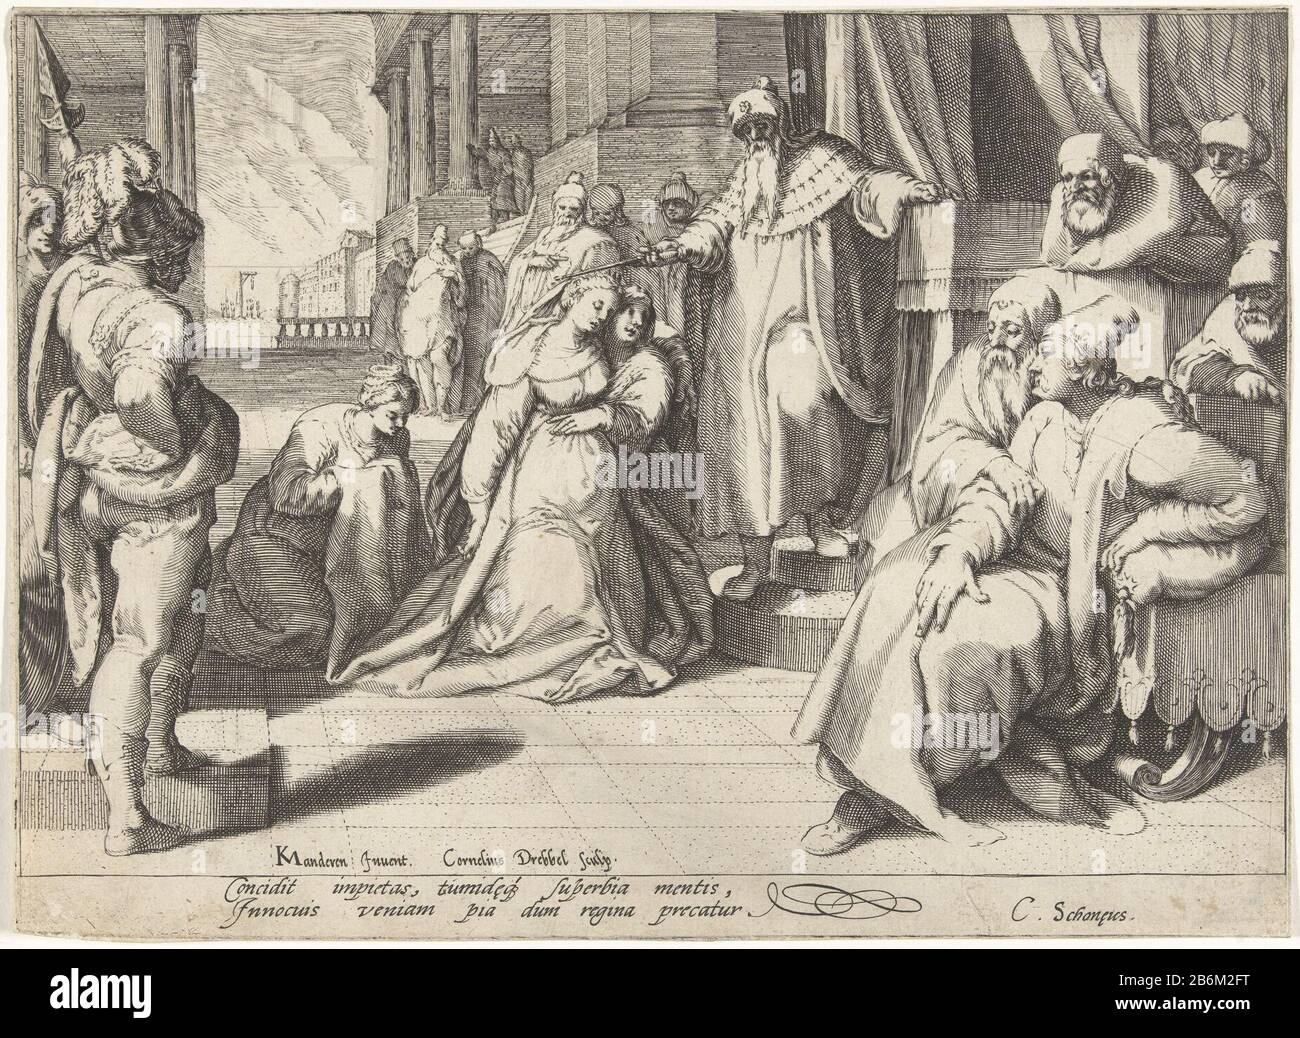 Ester voor Ahasveros Esther kneels before king Ahasuerus. An elderly woman holds her. The king leaves his scepter bags on her head as a sign of affection. Pendant of a picture with the Judgment of Salomon. Manufacturer : printmaker Cornelis Jacobsz. Drebbel (listed building), designed by Karel van Mander (listed property) writer Cornelius Schonaeus (listed property) Place manufacture: Netherlands Date: approx 1597 Physical features: engra and etching material: paper Technique: engra (printing process) / etch dimensions : sheet: h 160 mm × W 210 mm Subject: Esther before Ahasuerus (Esther 5: 1- Stock Photo